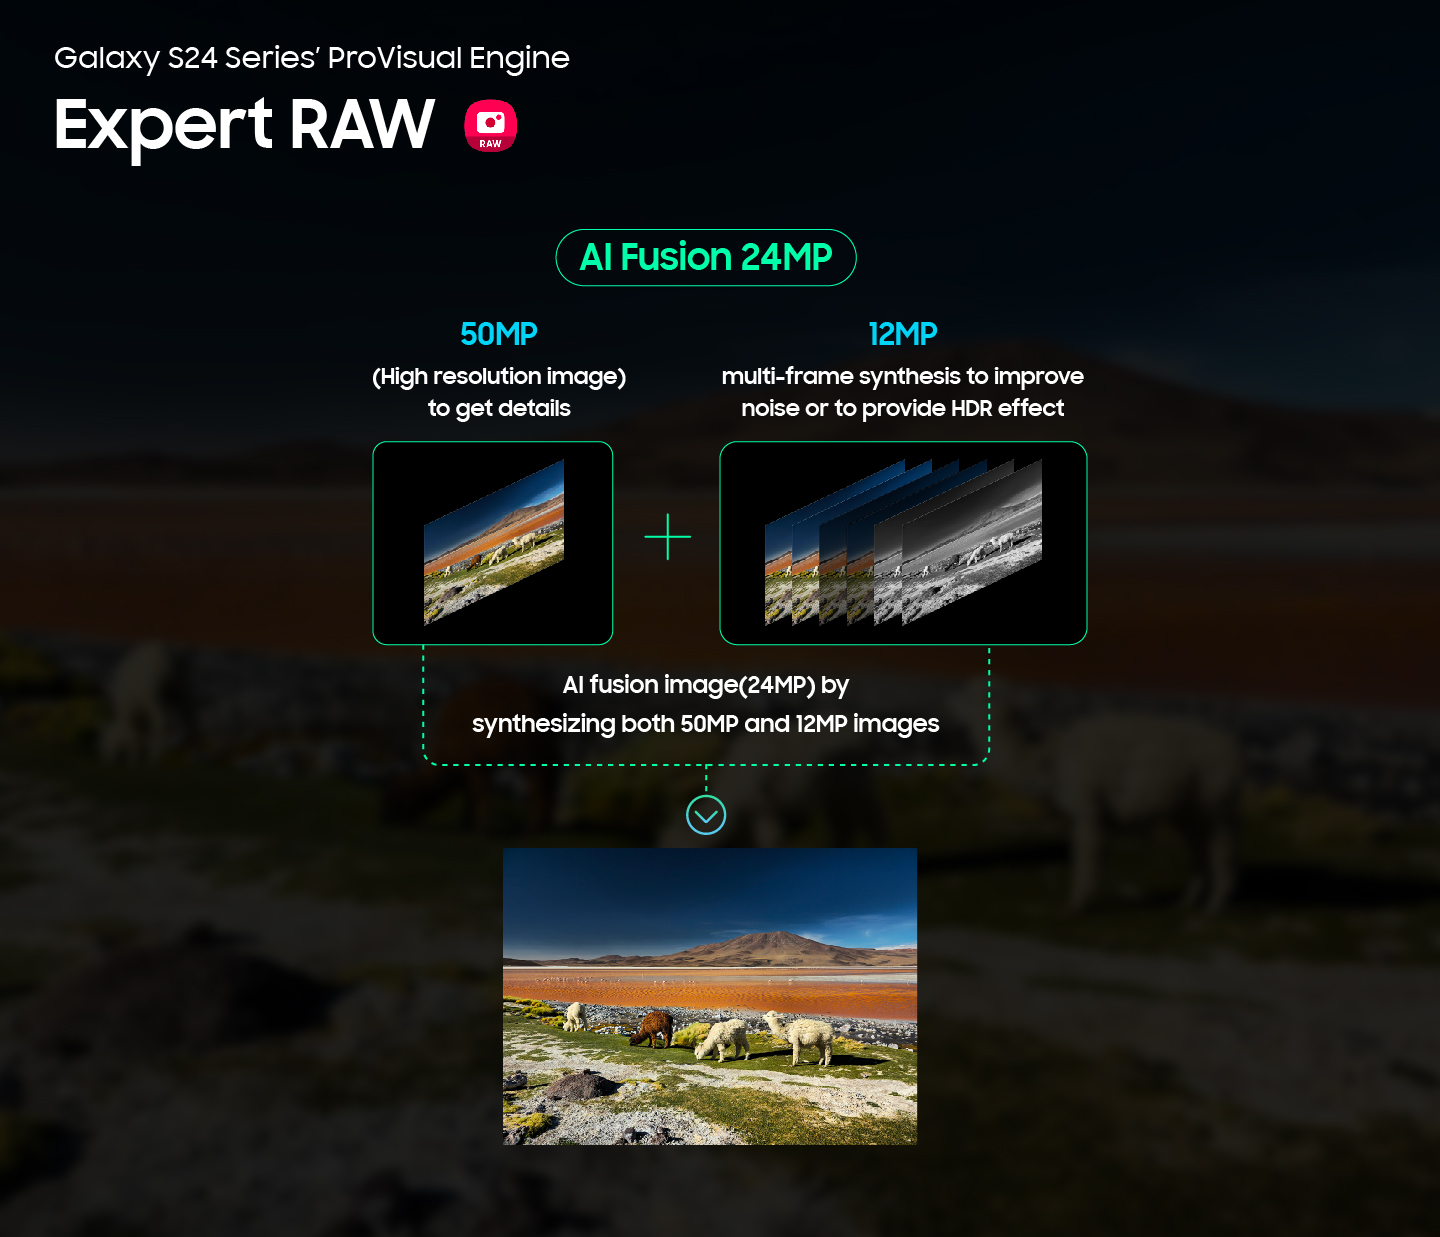 Infographic image of Galaxy S24 series' ProVisual Engine Expert RAW